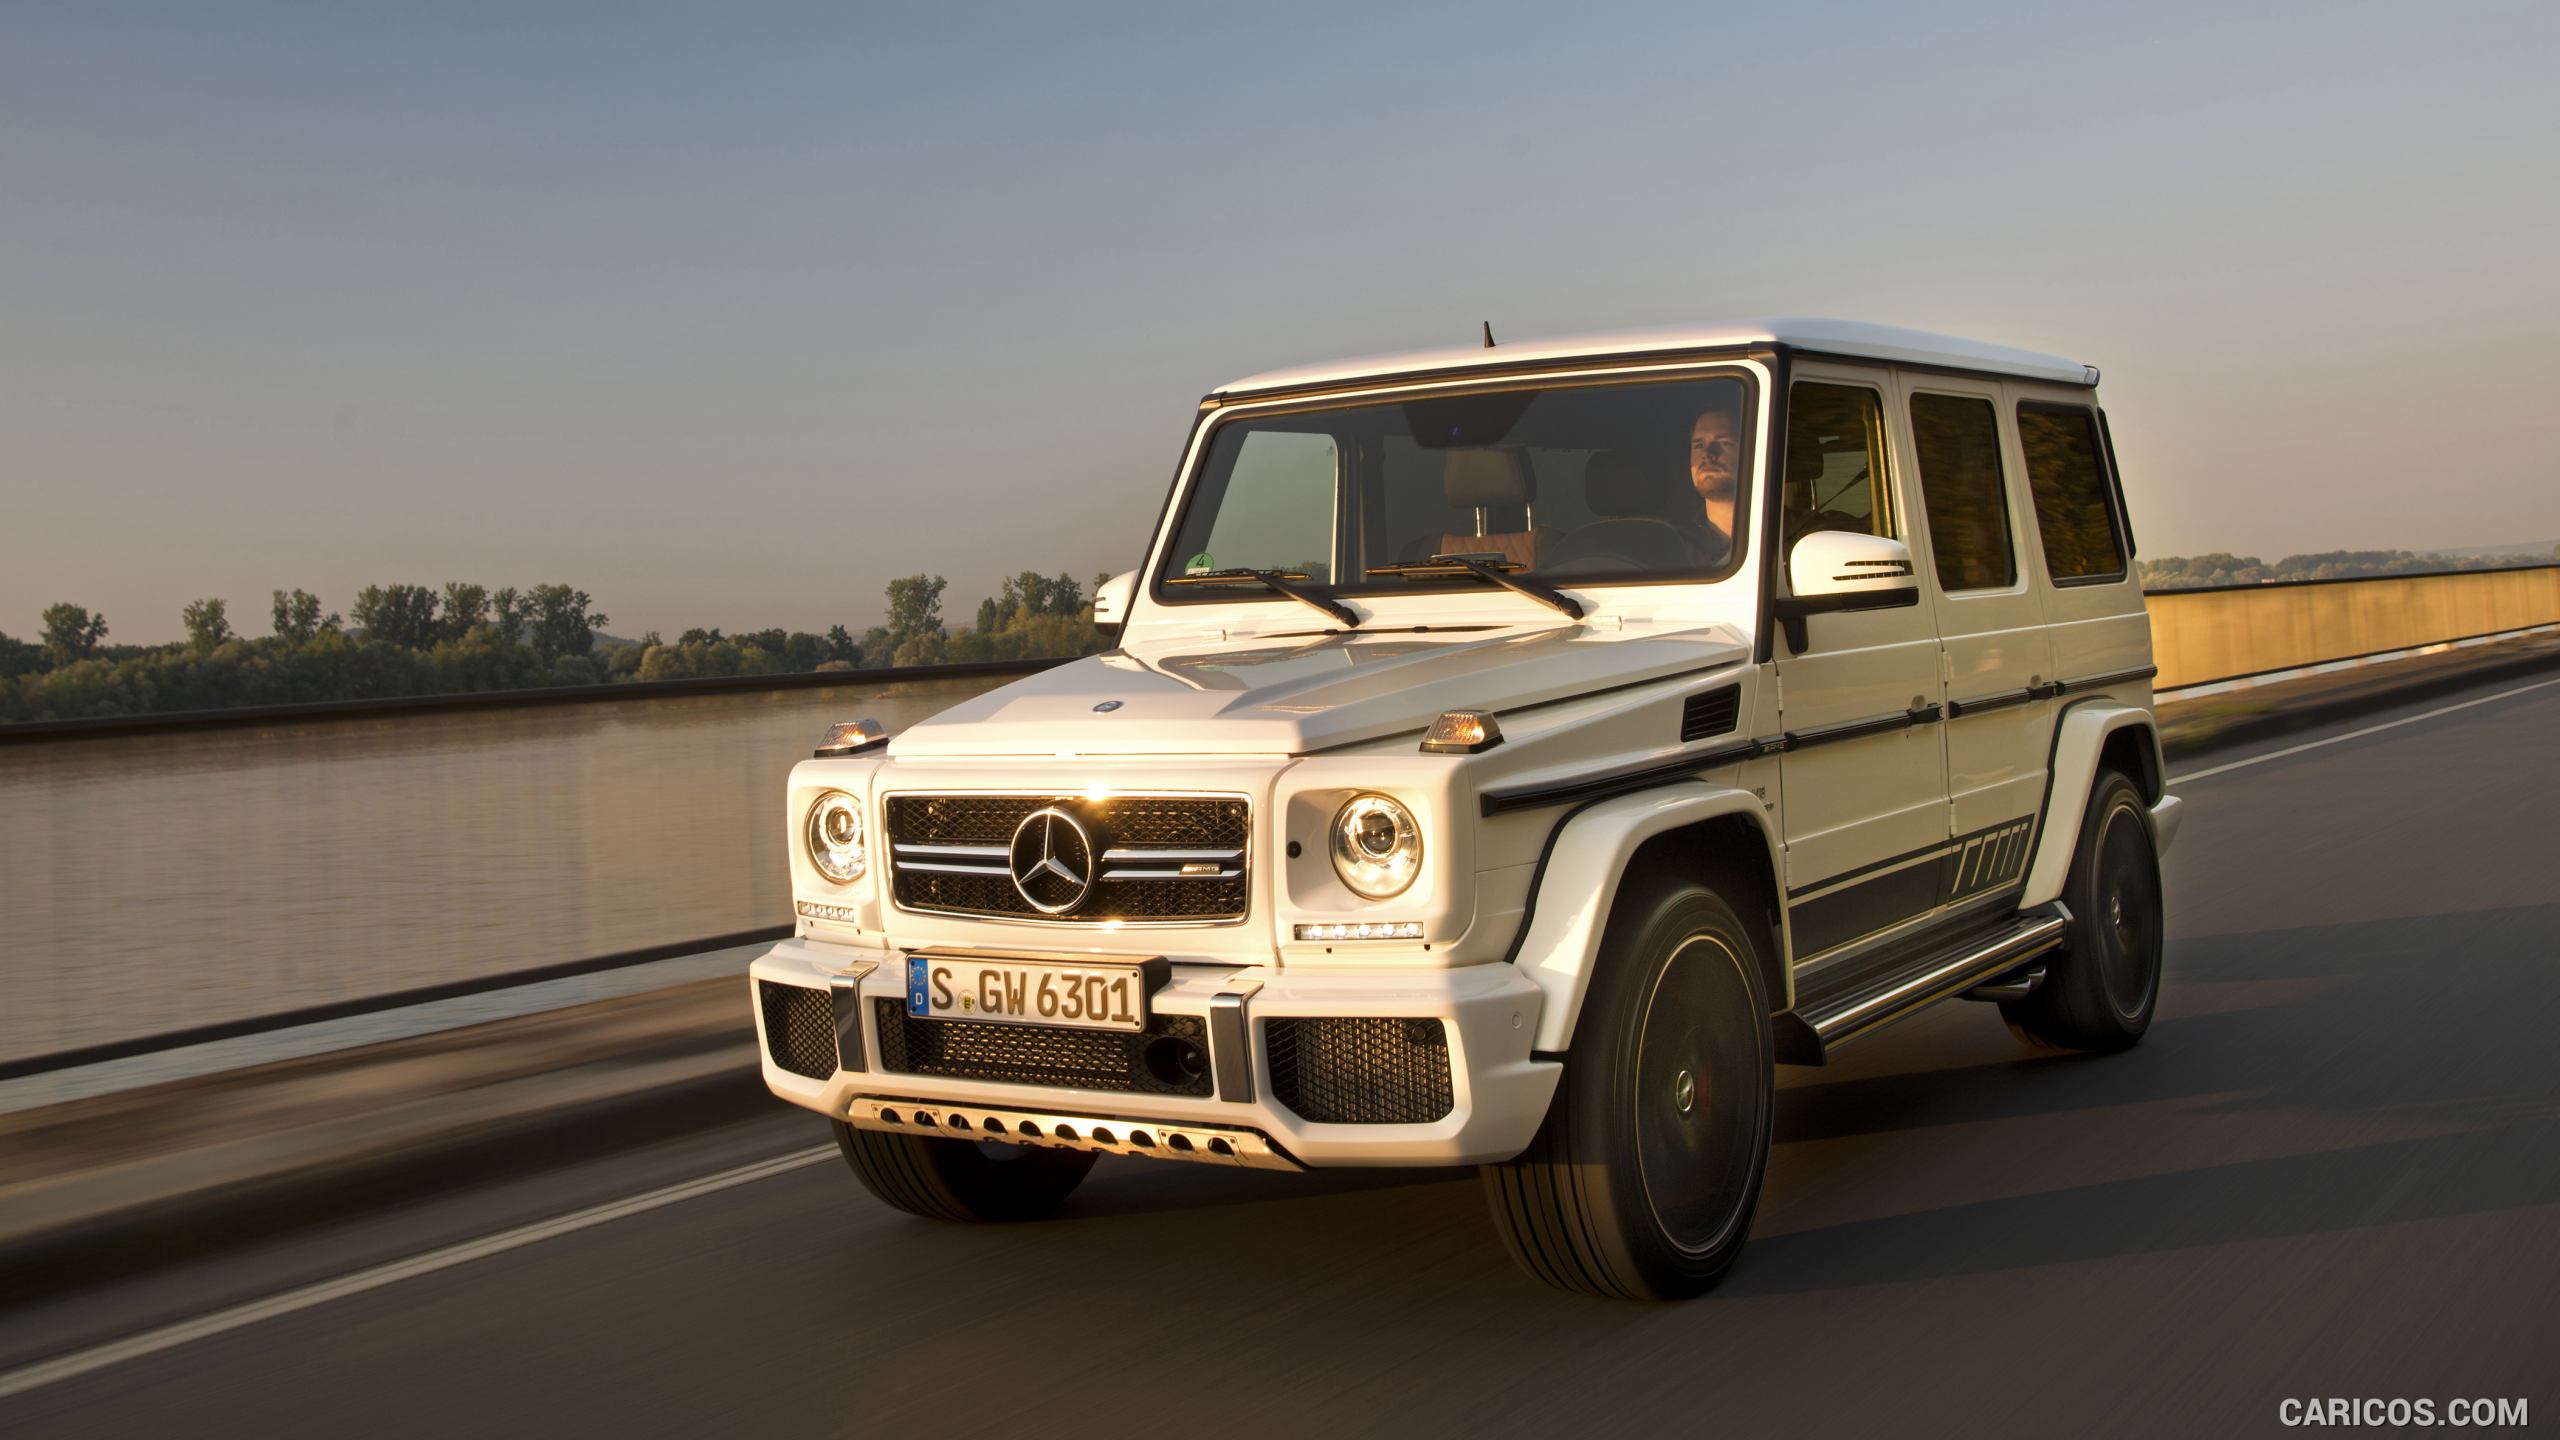 2016 Mercedes-AMG G63 AMG EDITION 463 in Polarwhite - Front, #36 of 48